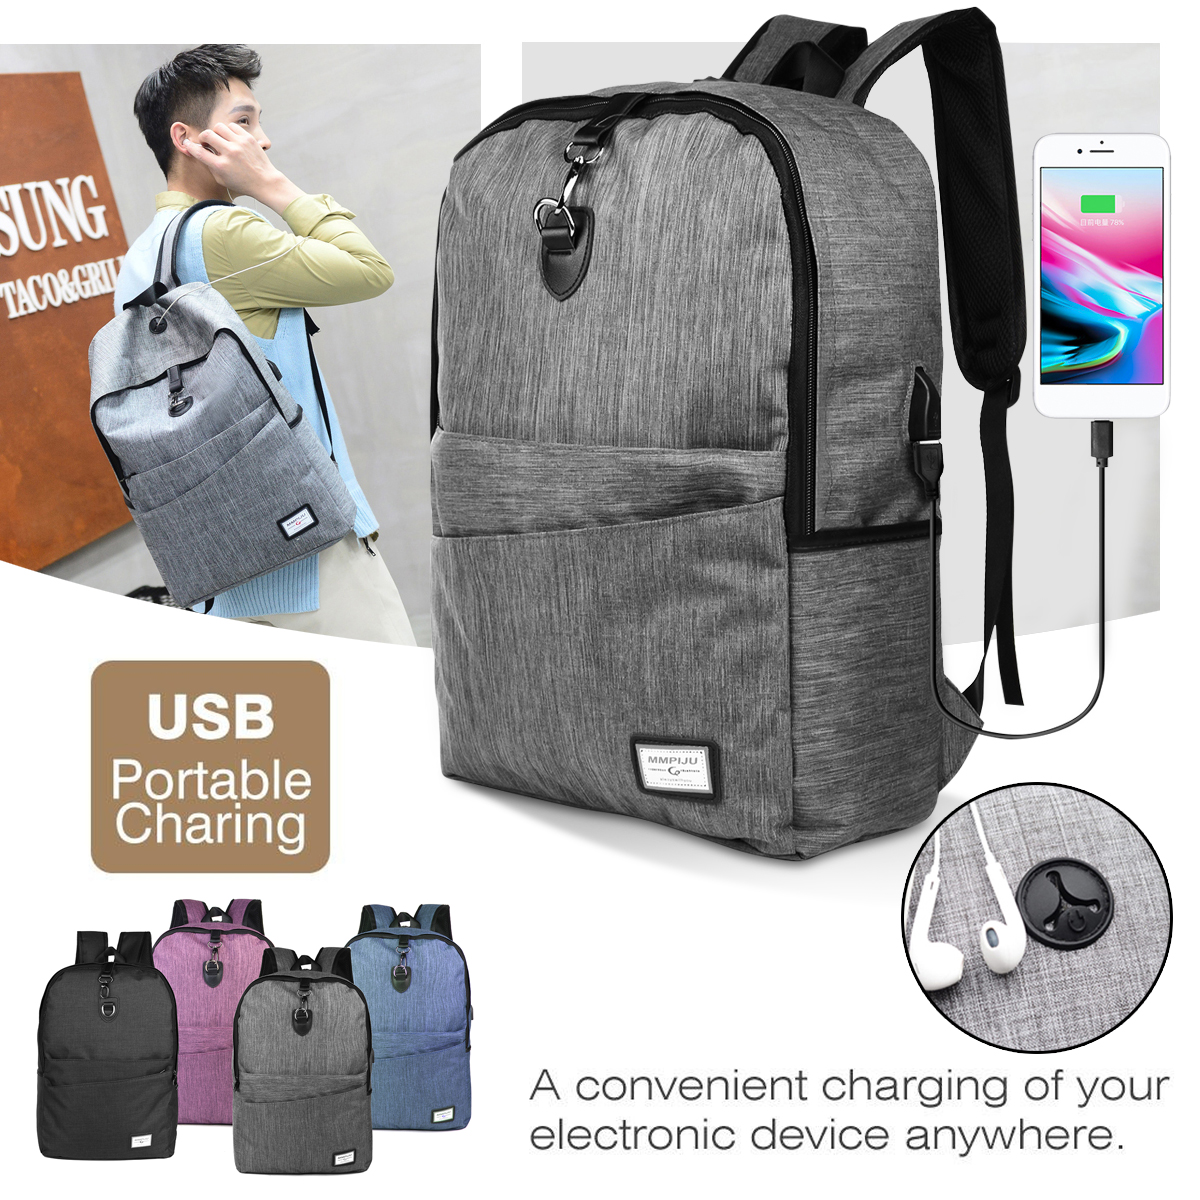 USB-Charging-Backpack-Anti-Thief-Laptop-Travel-Shoulder-Bag-with-Headphone-Plug-for-Macbook-1266101-1